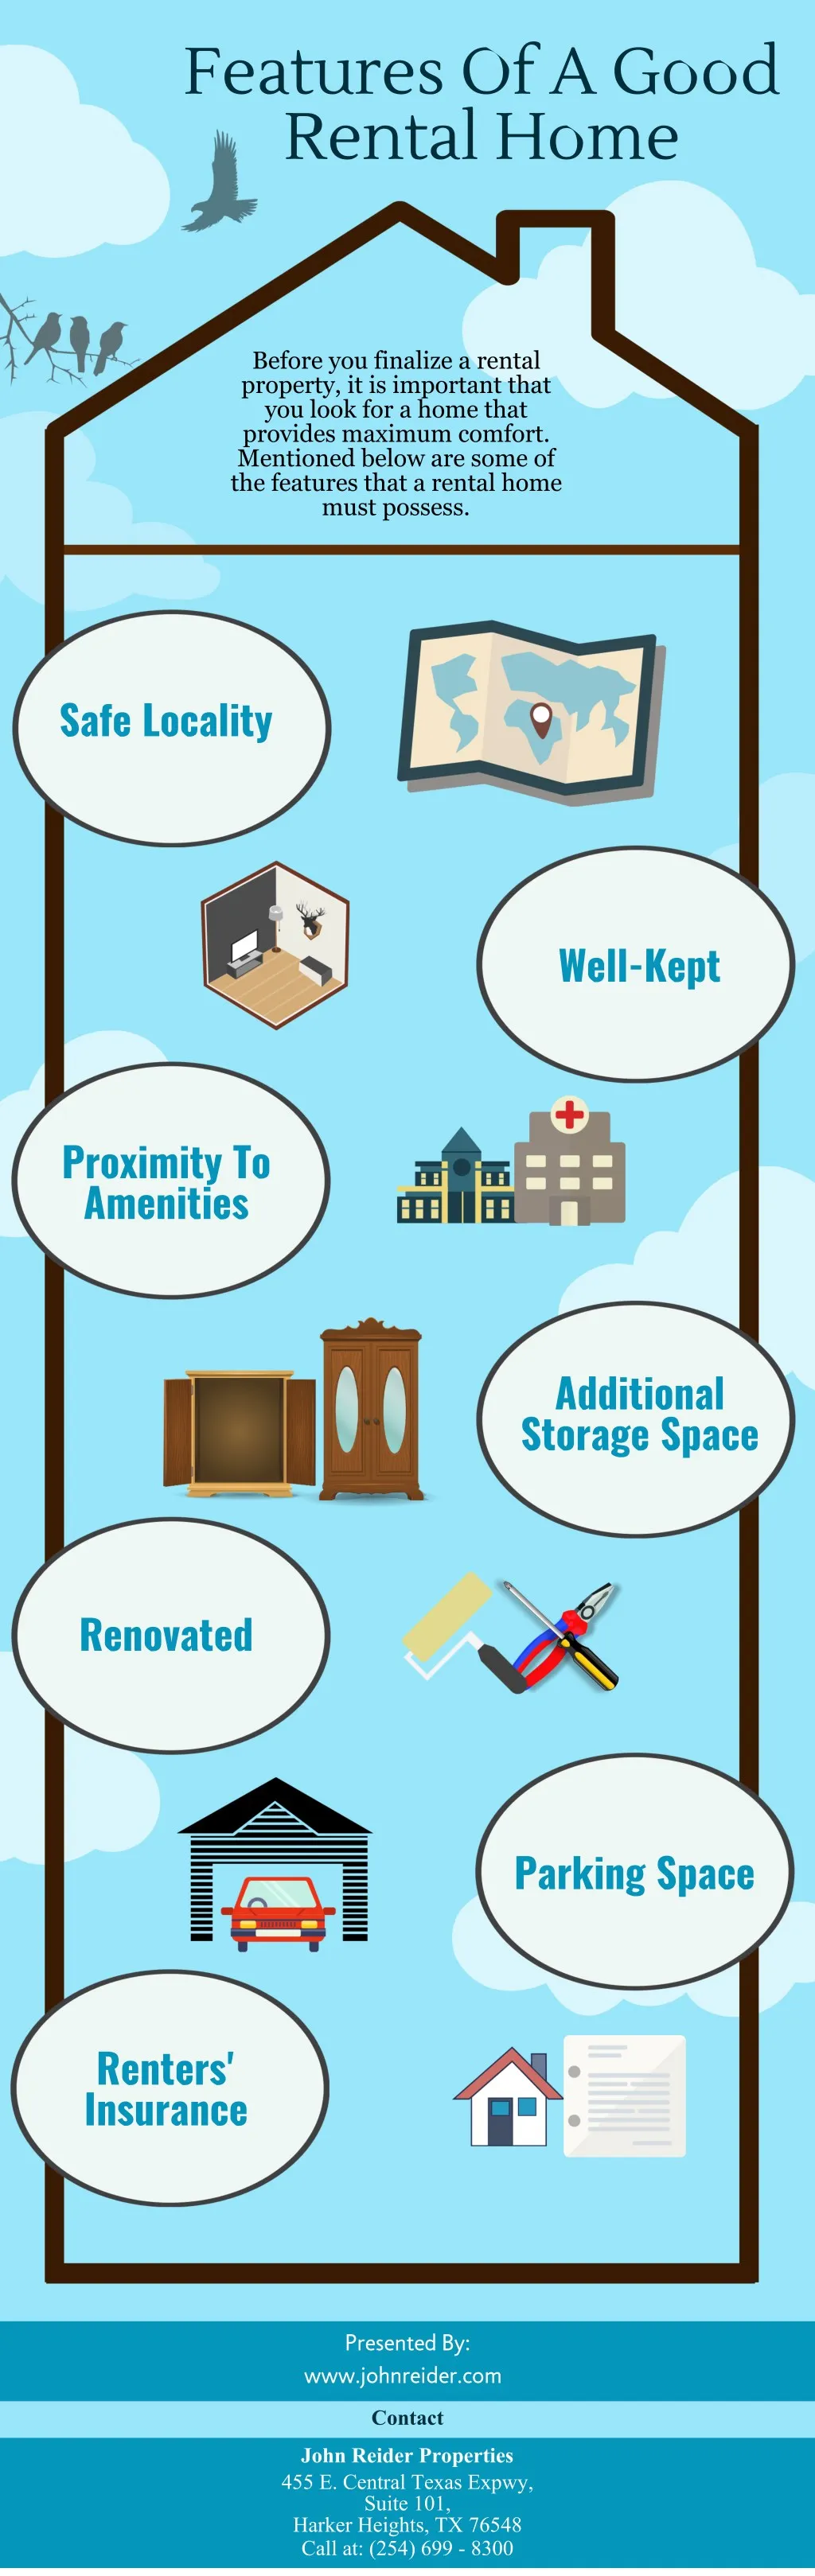 features of a good rental home